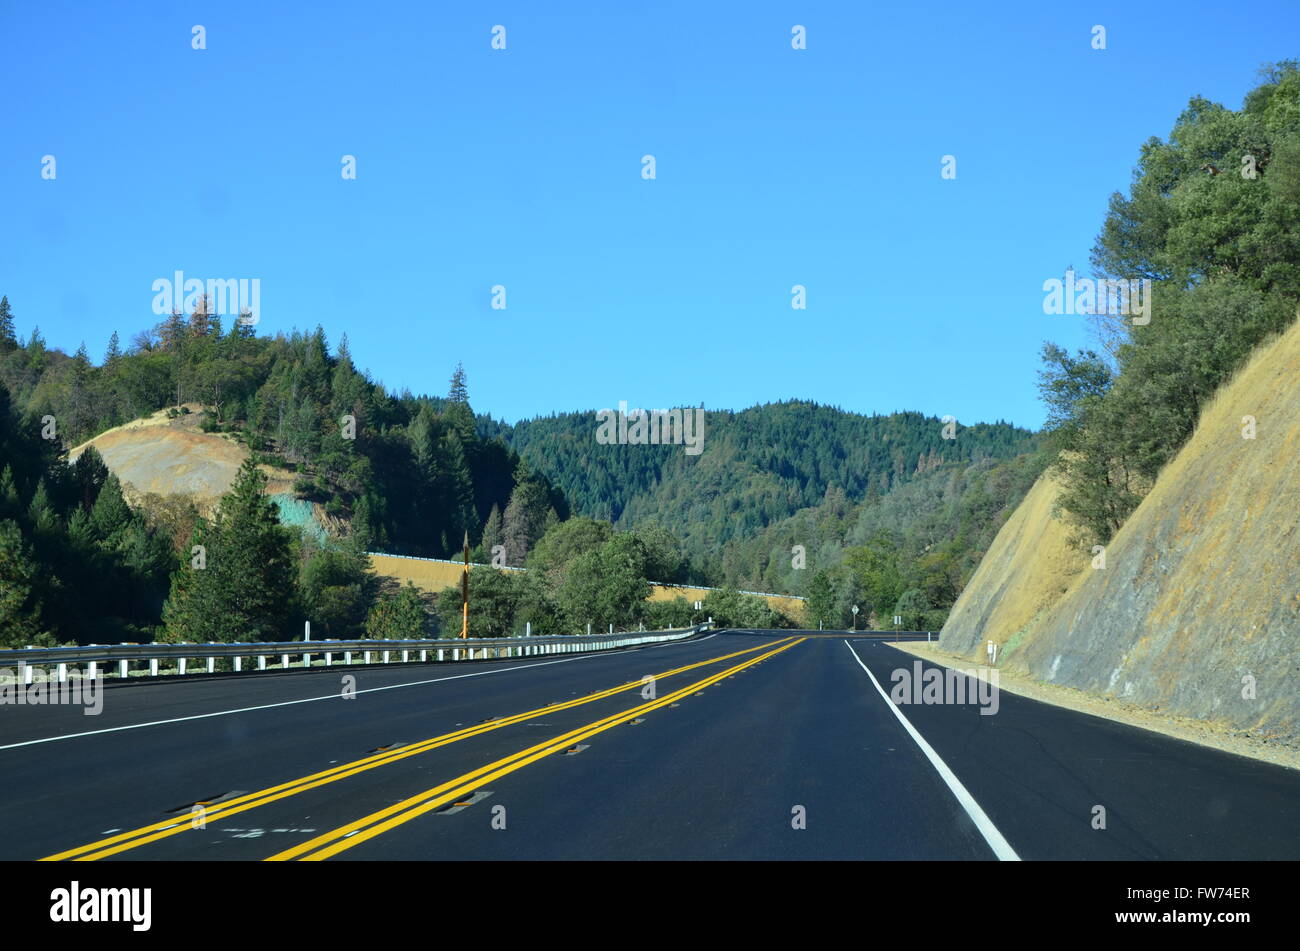 A deserted multi-lane highway in Northern California. Stock Photo